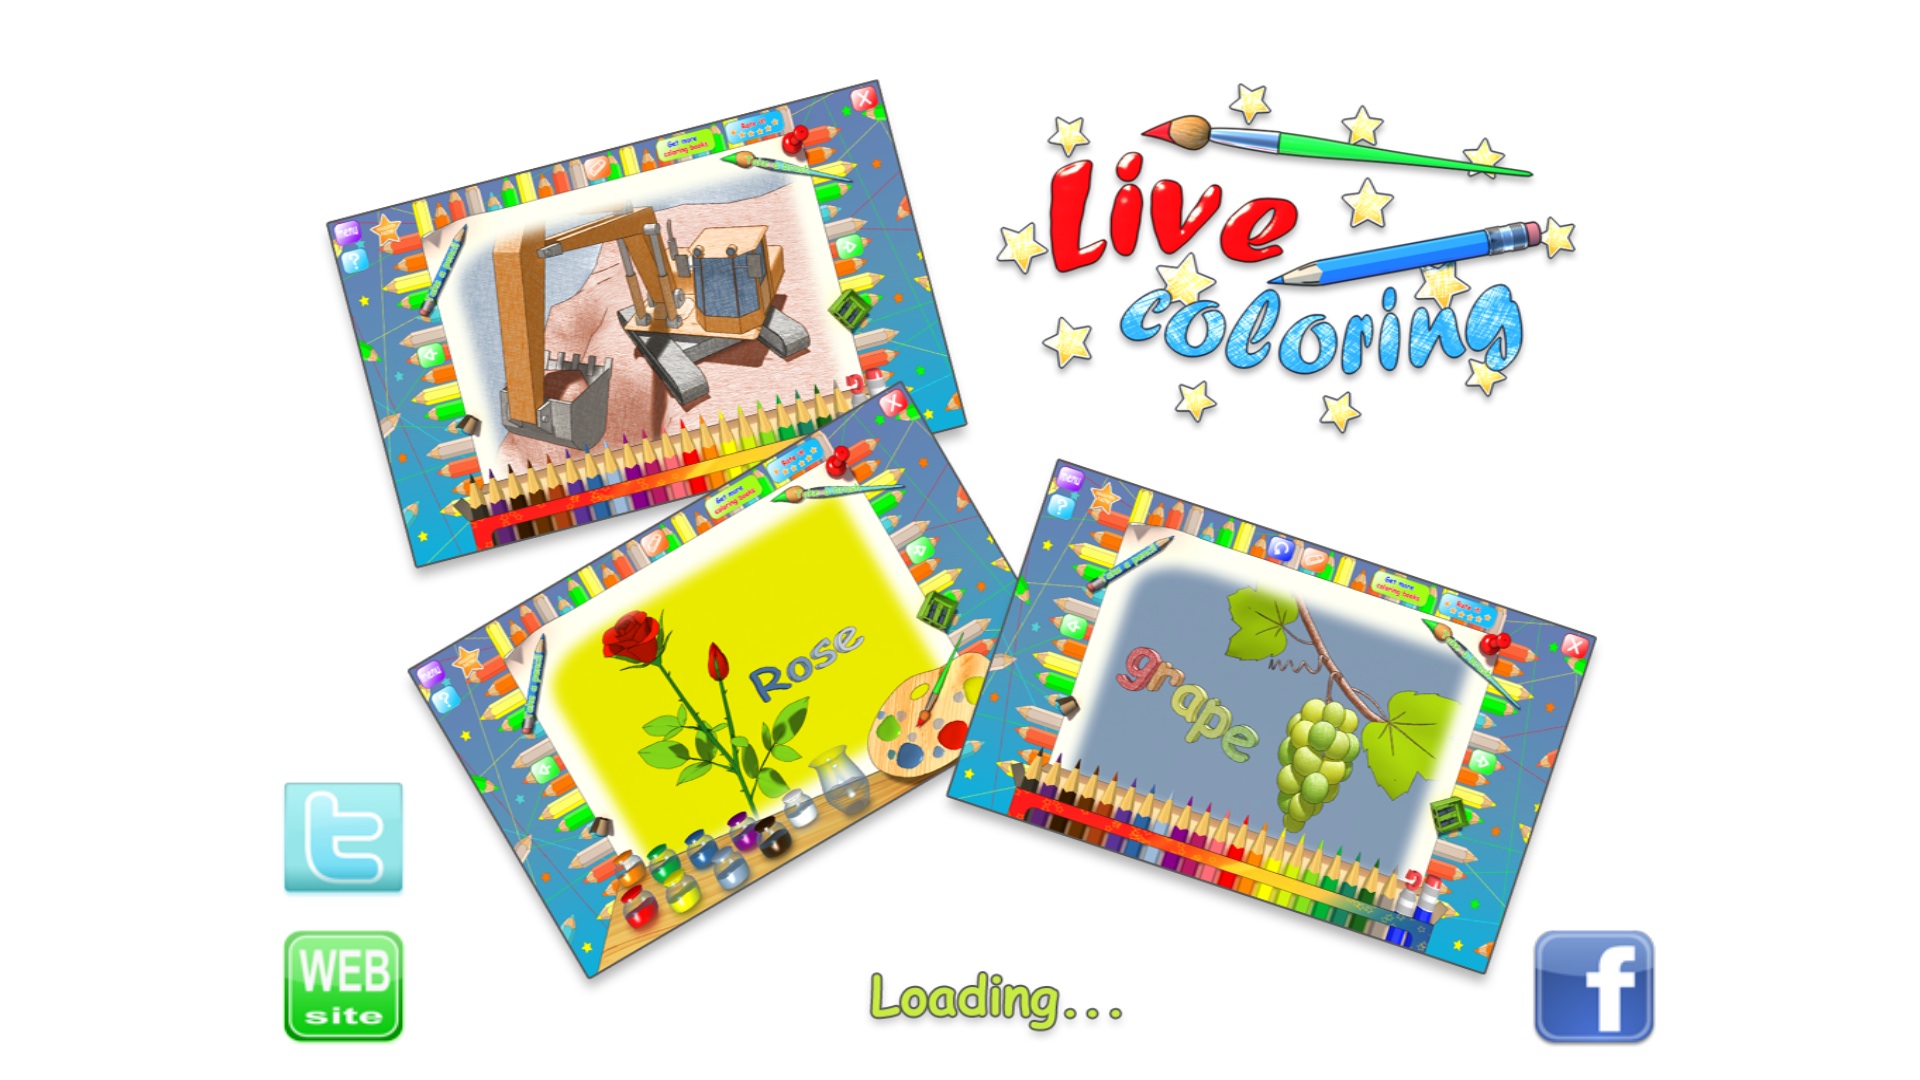 Live Coloring Book 2.0 : Loading Window